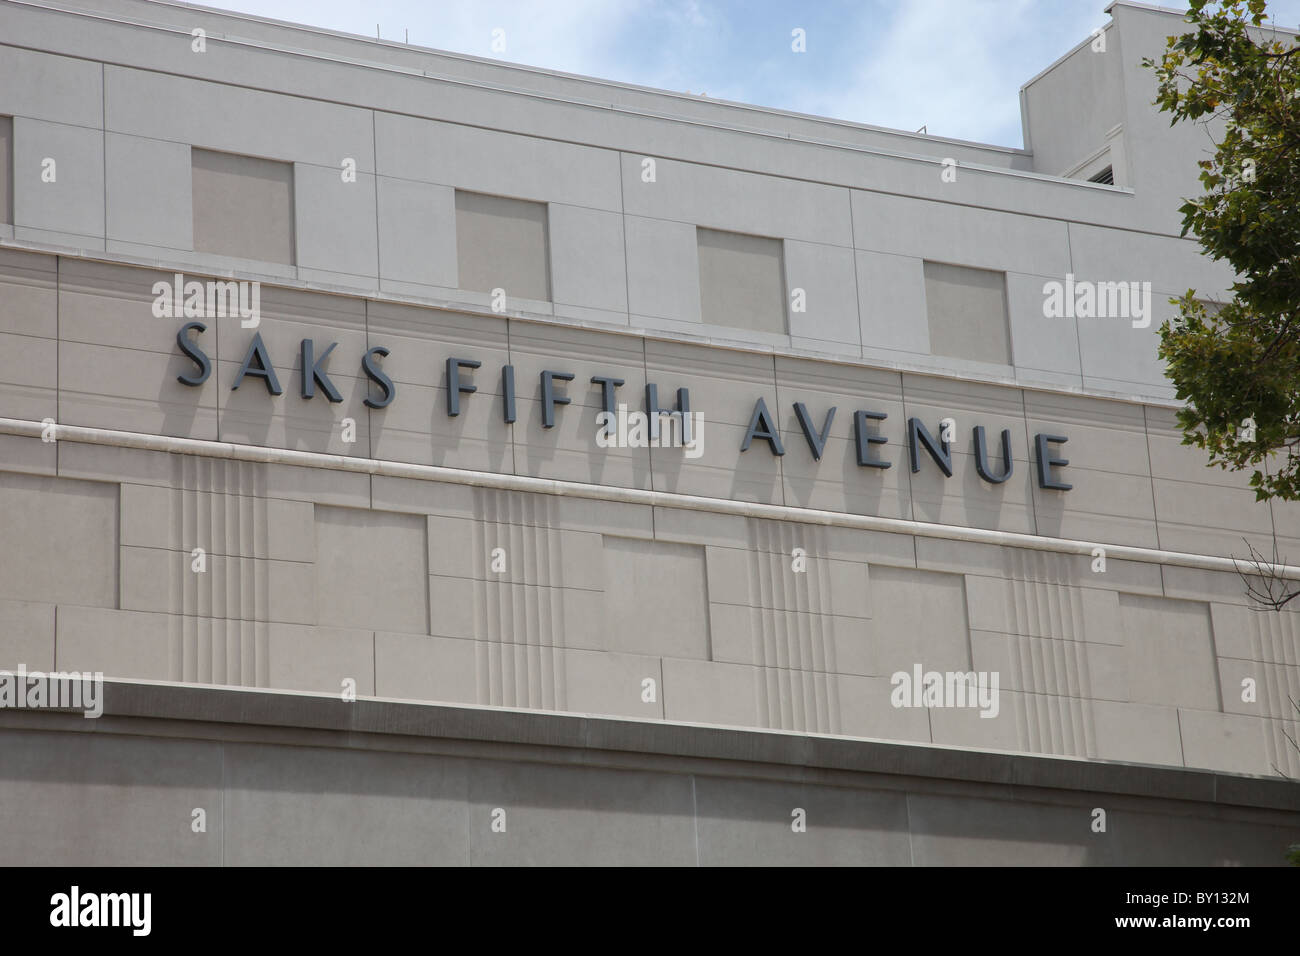 SAKS FIFTH AVENUE  329 Photos & 492 Reviews - 9600 Wilshire Blvd, Beverly  Hills, California - Shoe Stores - Phone Number - Yelp